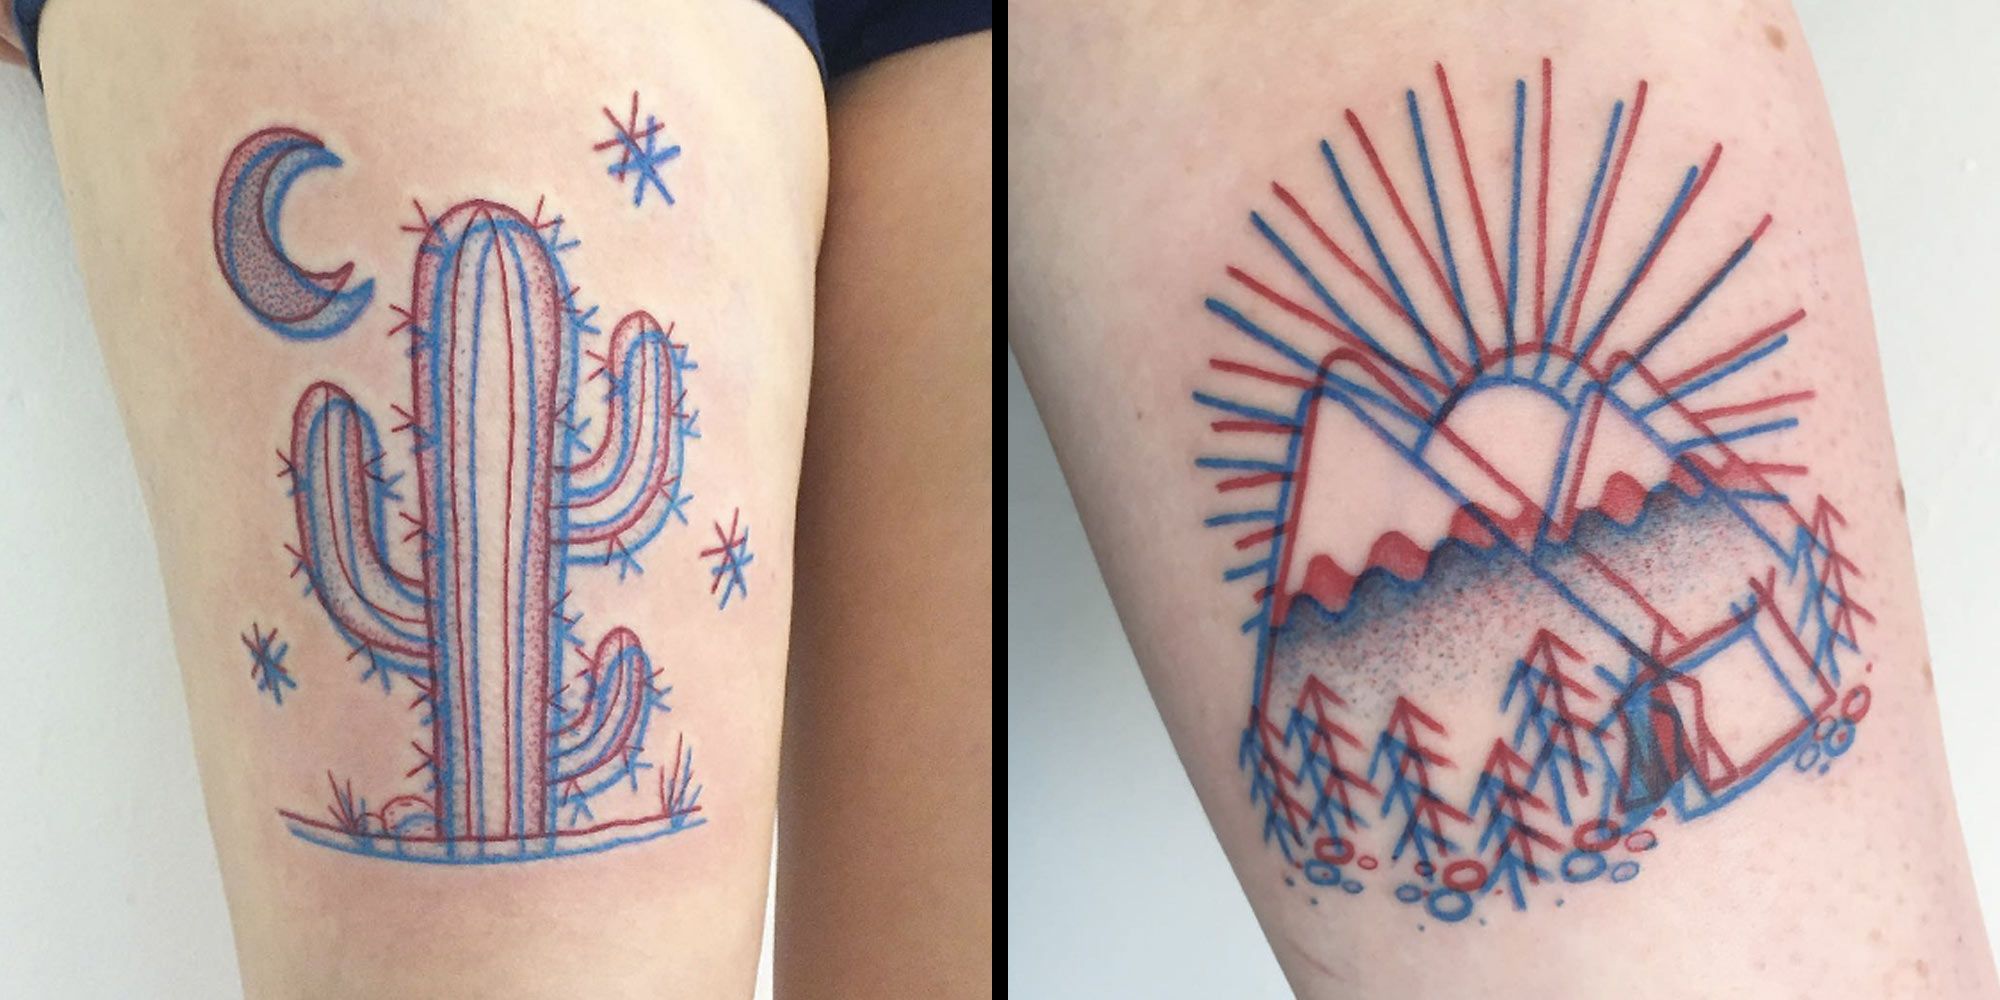 3Dstyle tattoos nearly pop off your arm  Mashable